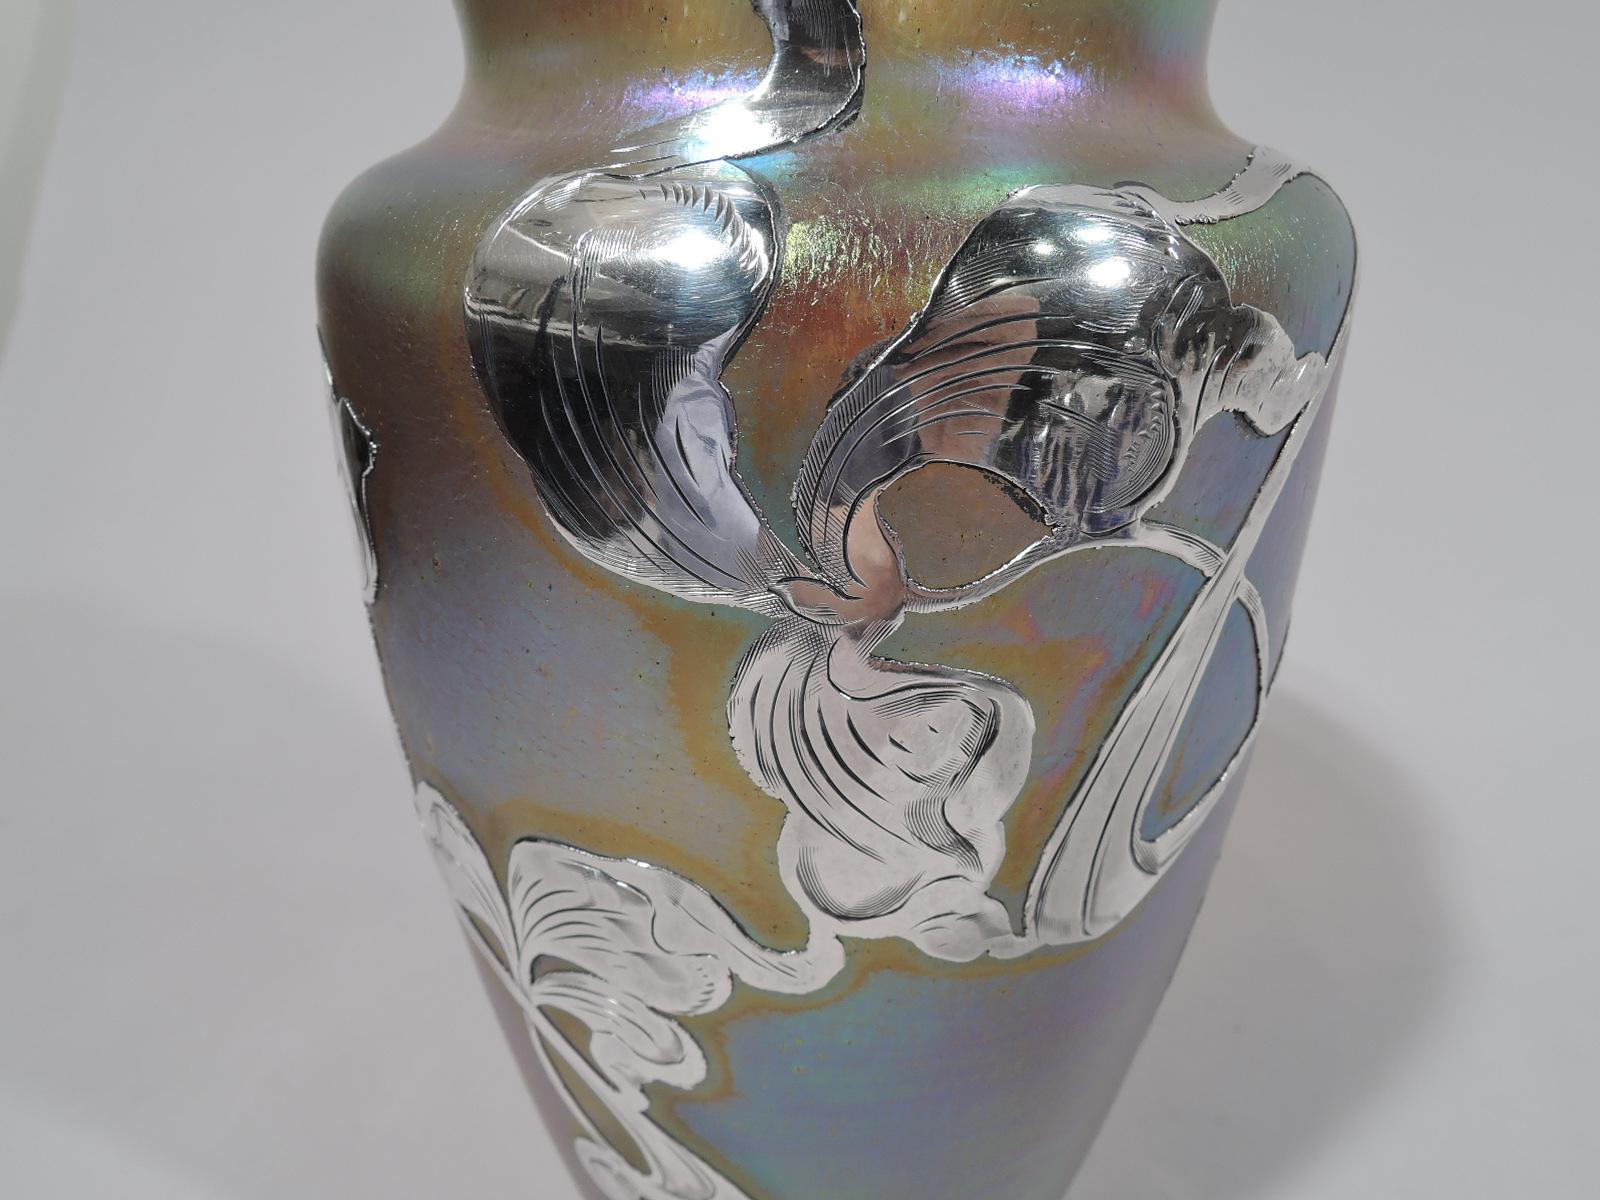 20th Century Art Nouveau Iridescent and Silver Overlay Glass Vase by Historic Loetz